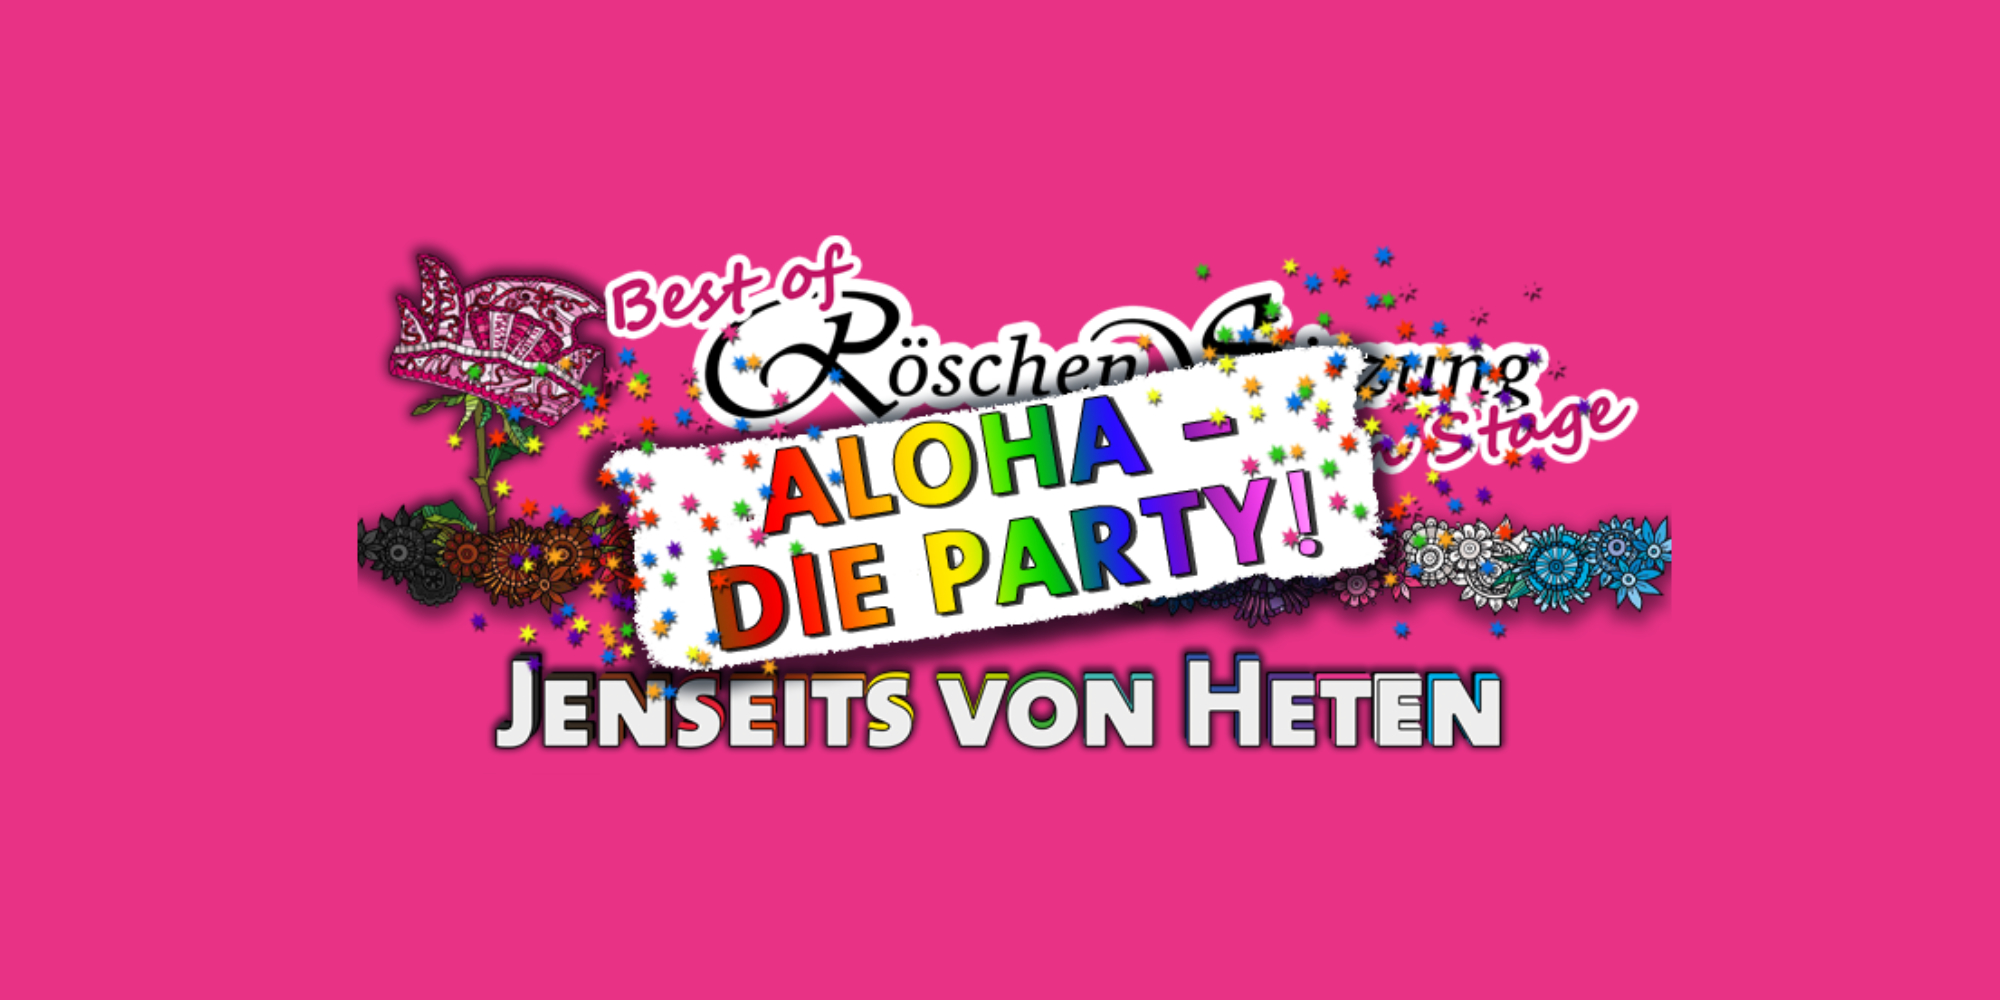 ALOHA - die Party!